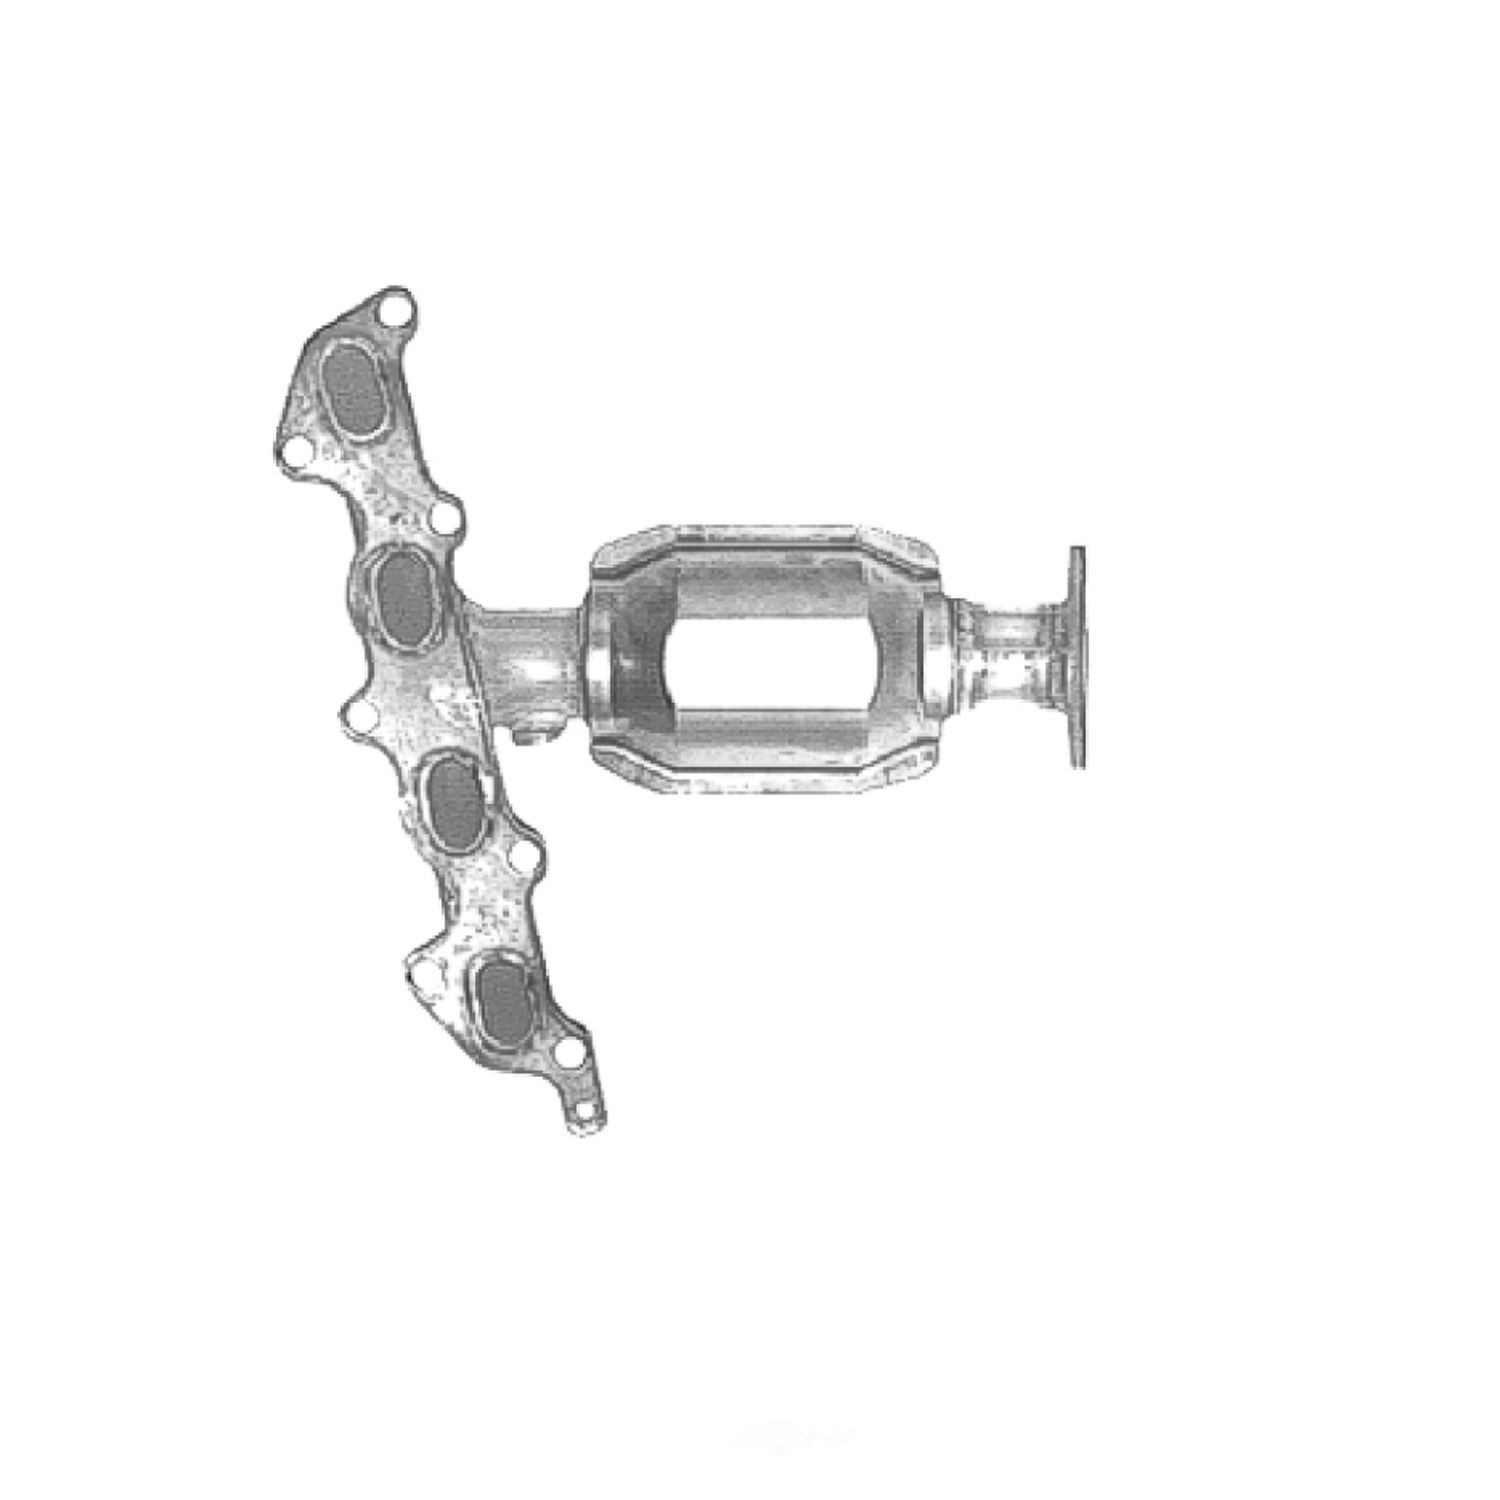 AP EXHAUST FEDERAL CONVERTER - Catalytic Converter with Integrated Exhaust Manifold - APG 641194